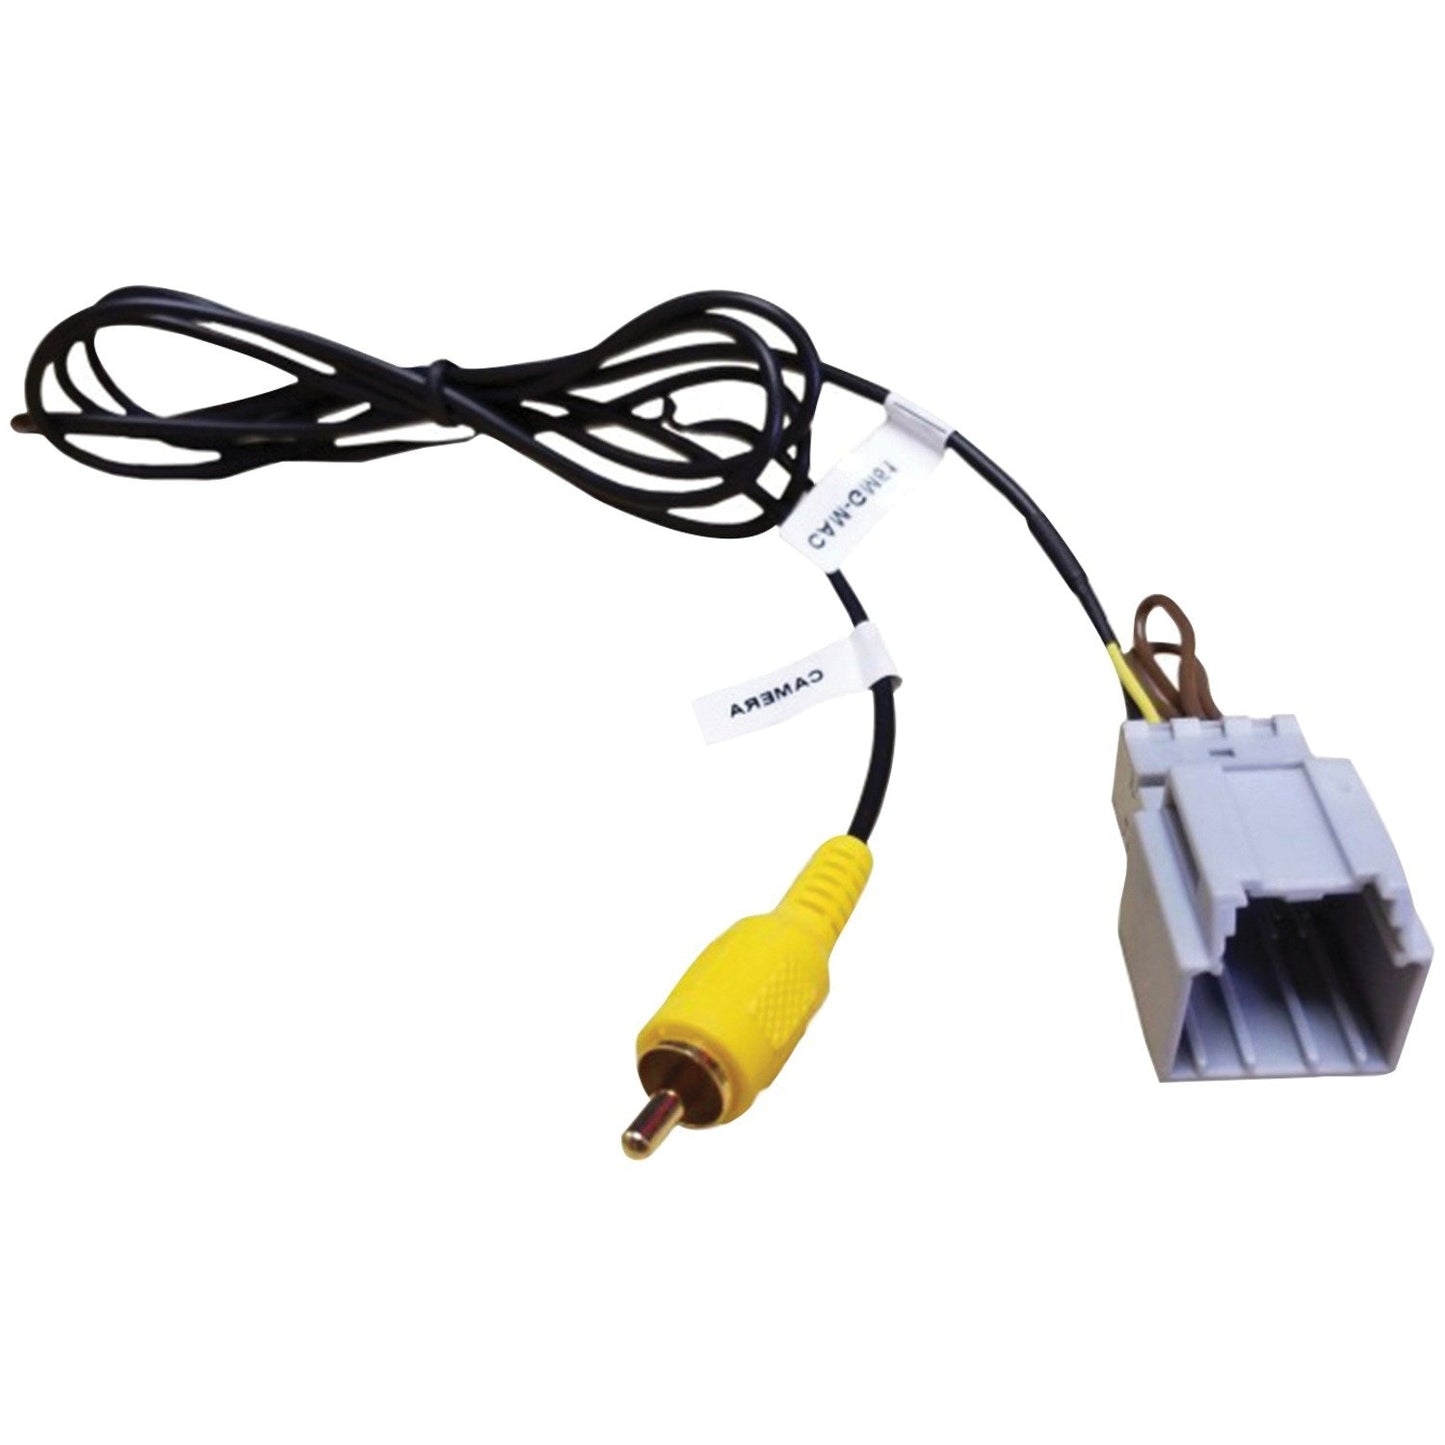 PAC CAM-GM51 Reverse Camera Harness (For Select 2014 to 2018 GM Vehicles)